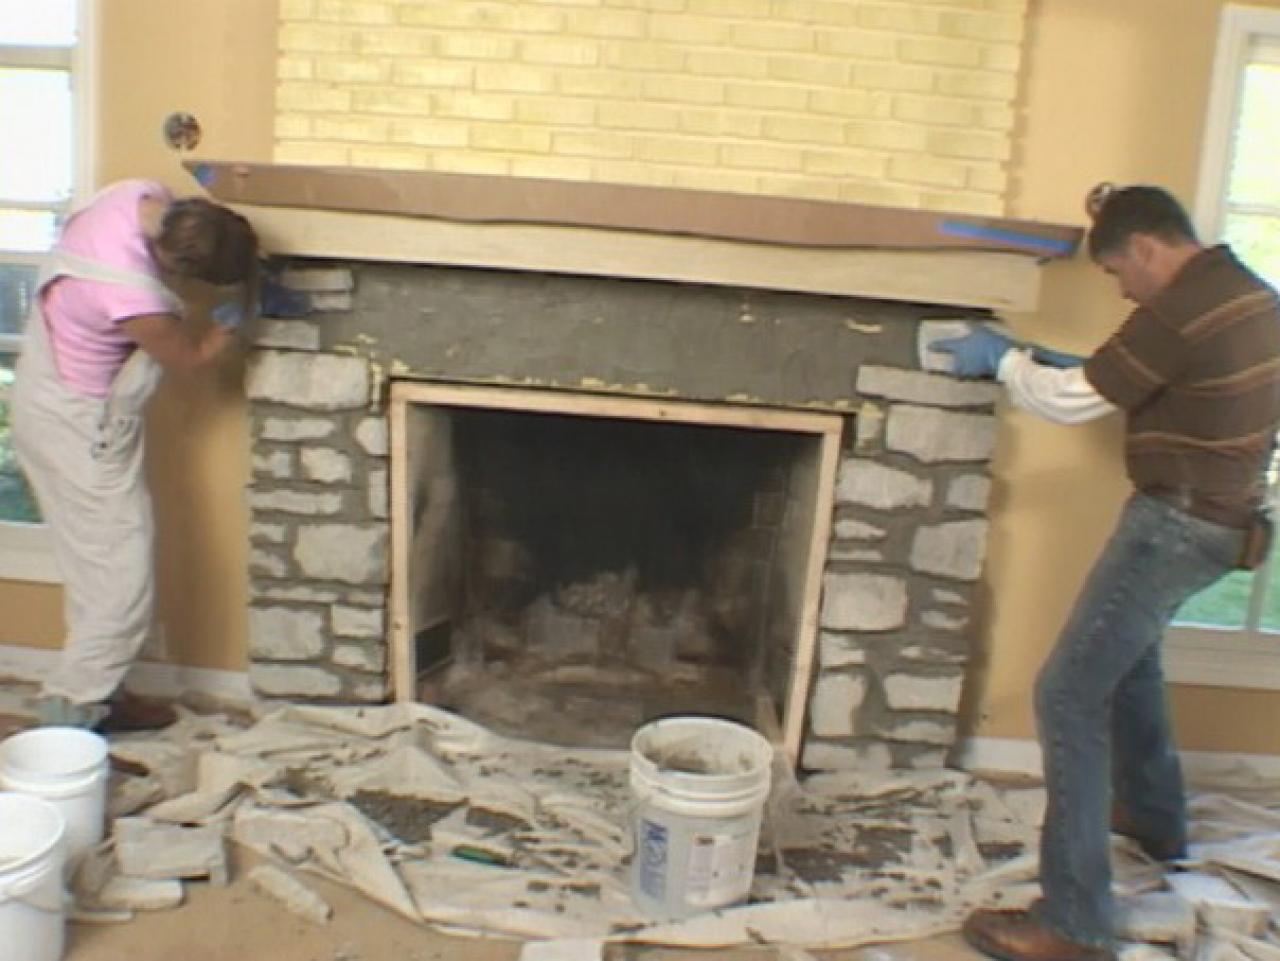 A Fireplace Mantel And Add Stone Veneer, How To Lay Natural Stone Fireplace